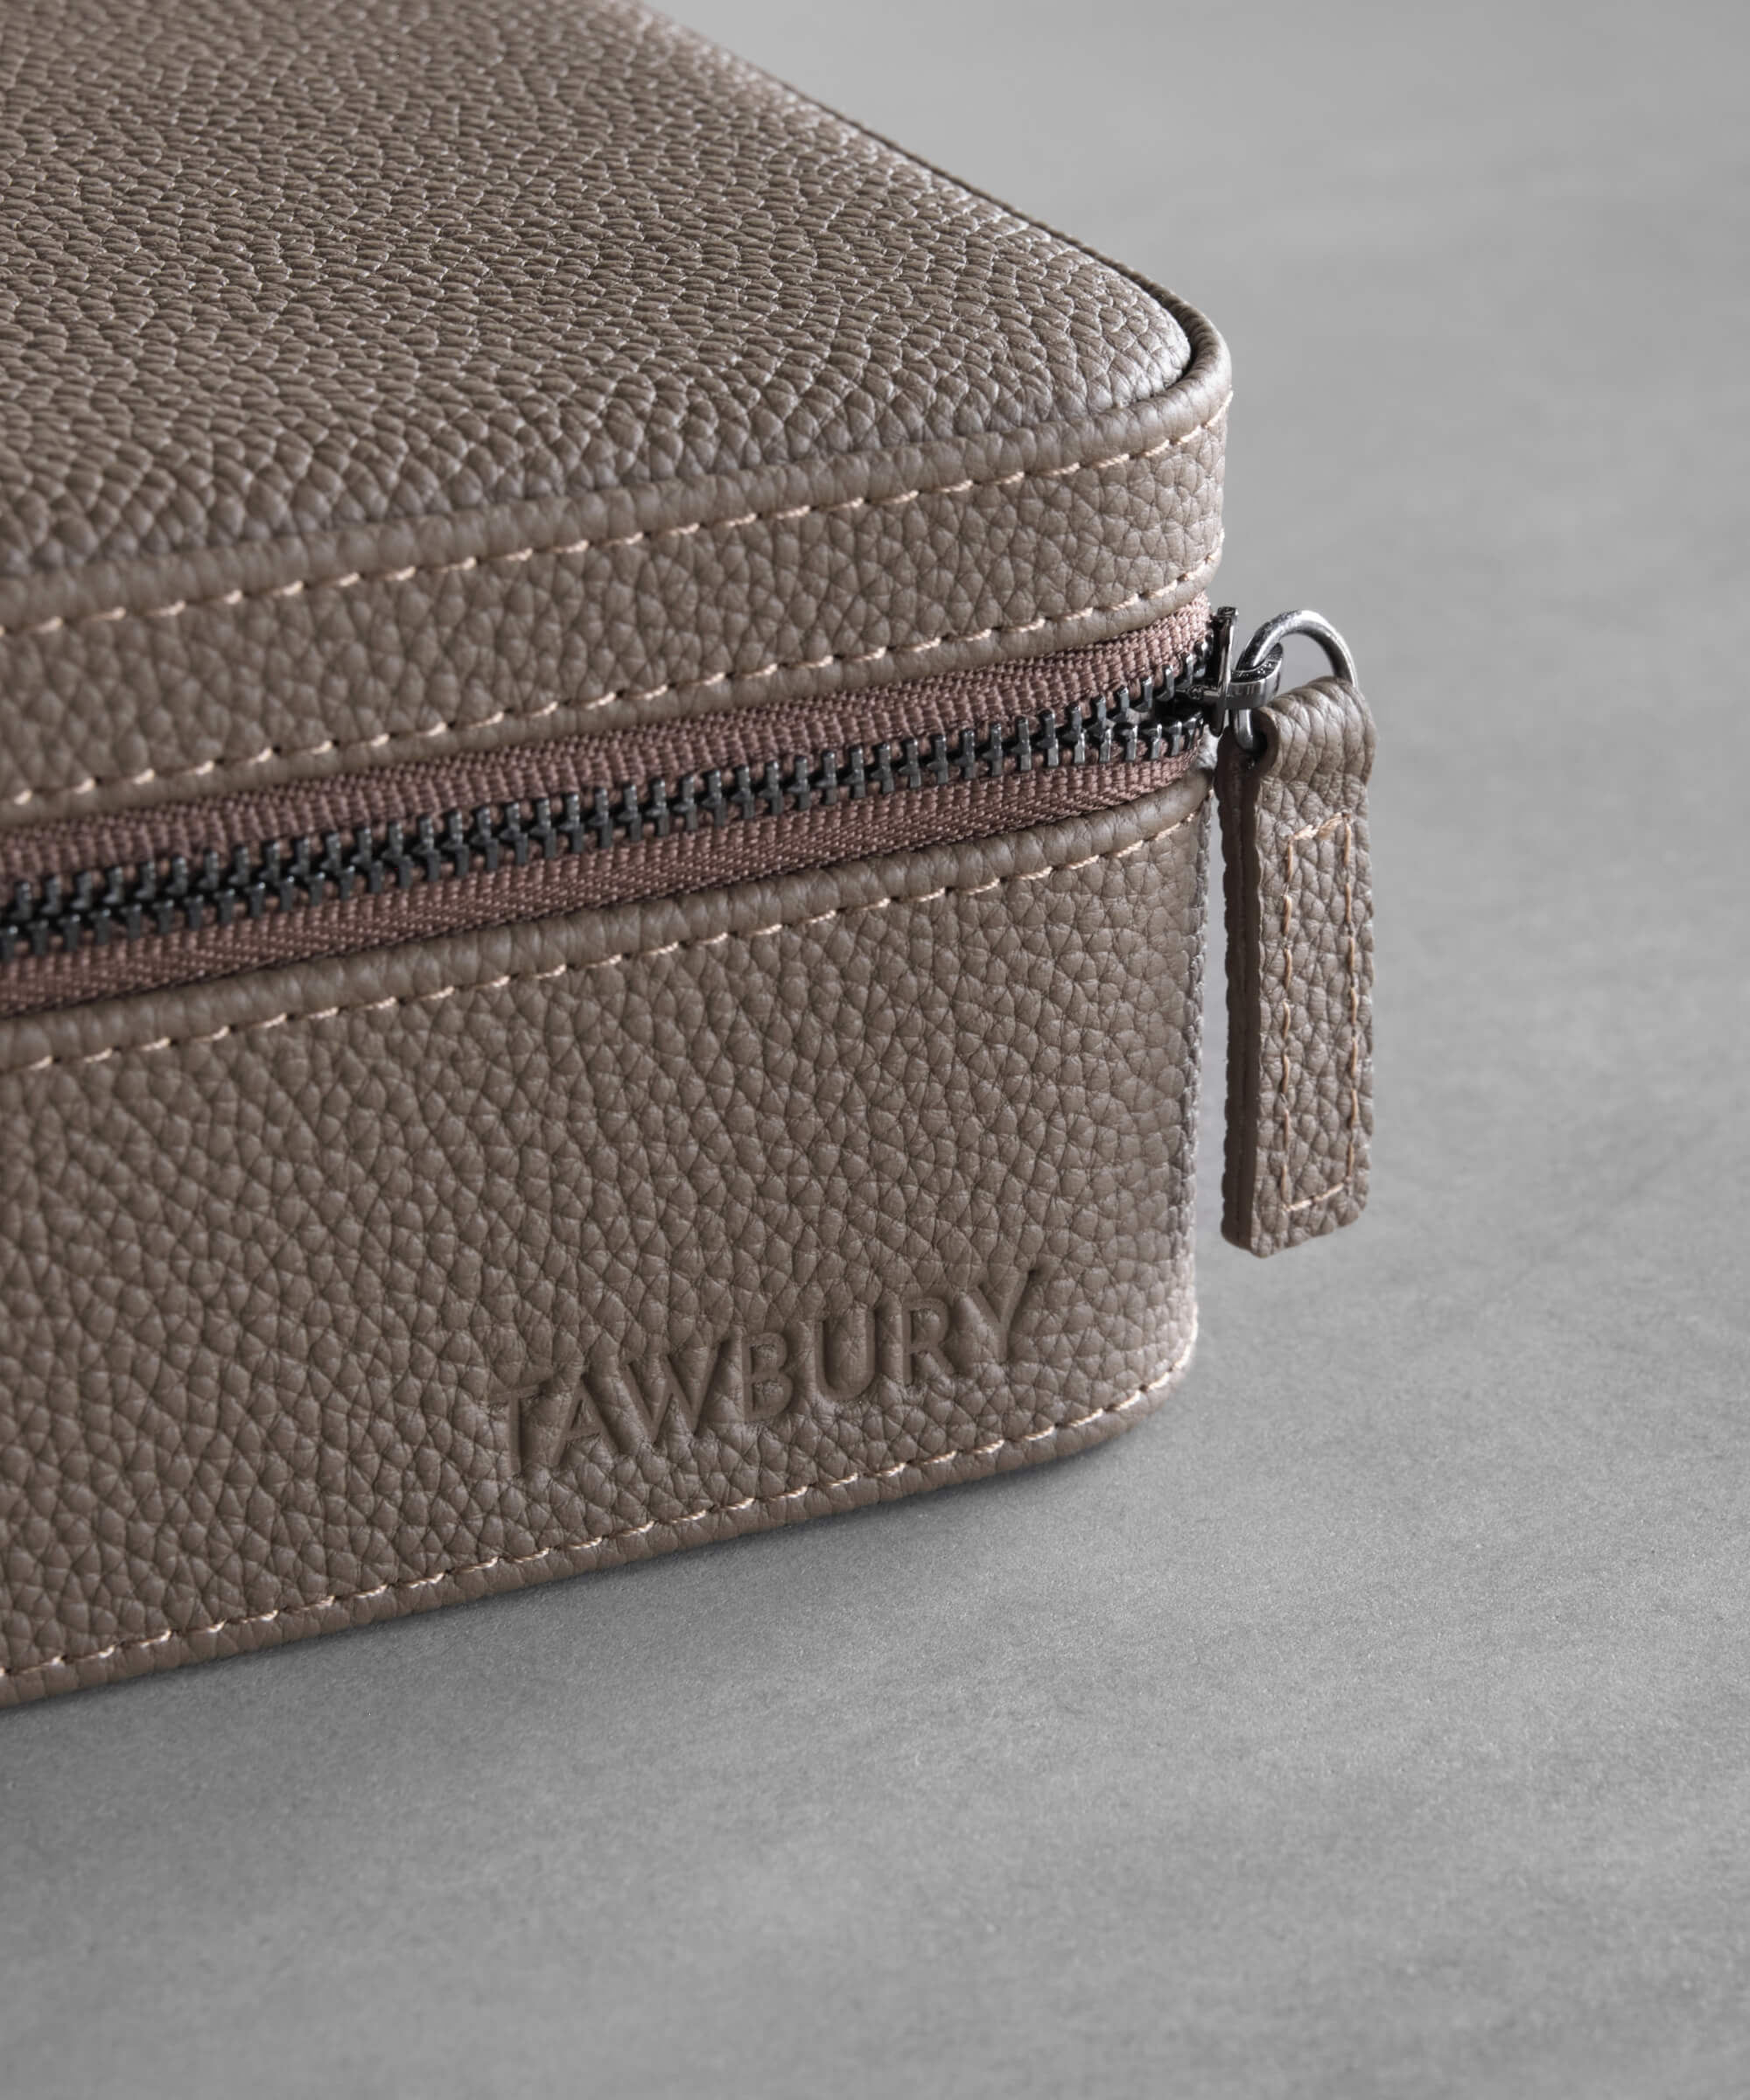 A Fraser 3 Watch Travel Case - Taupe by TAWBURY with a zipper for easy travel and storage.